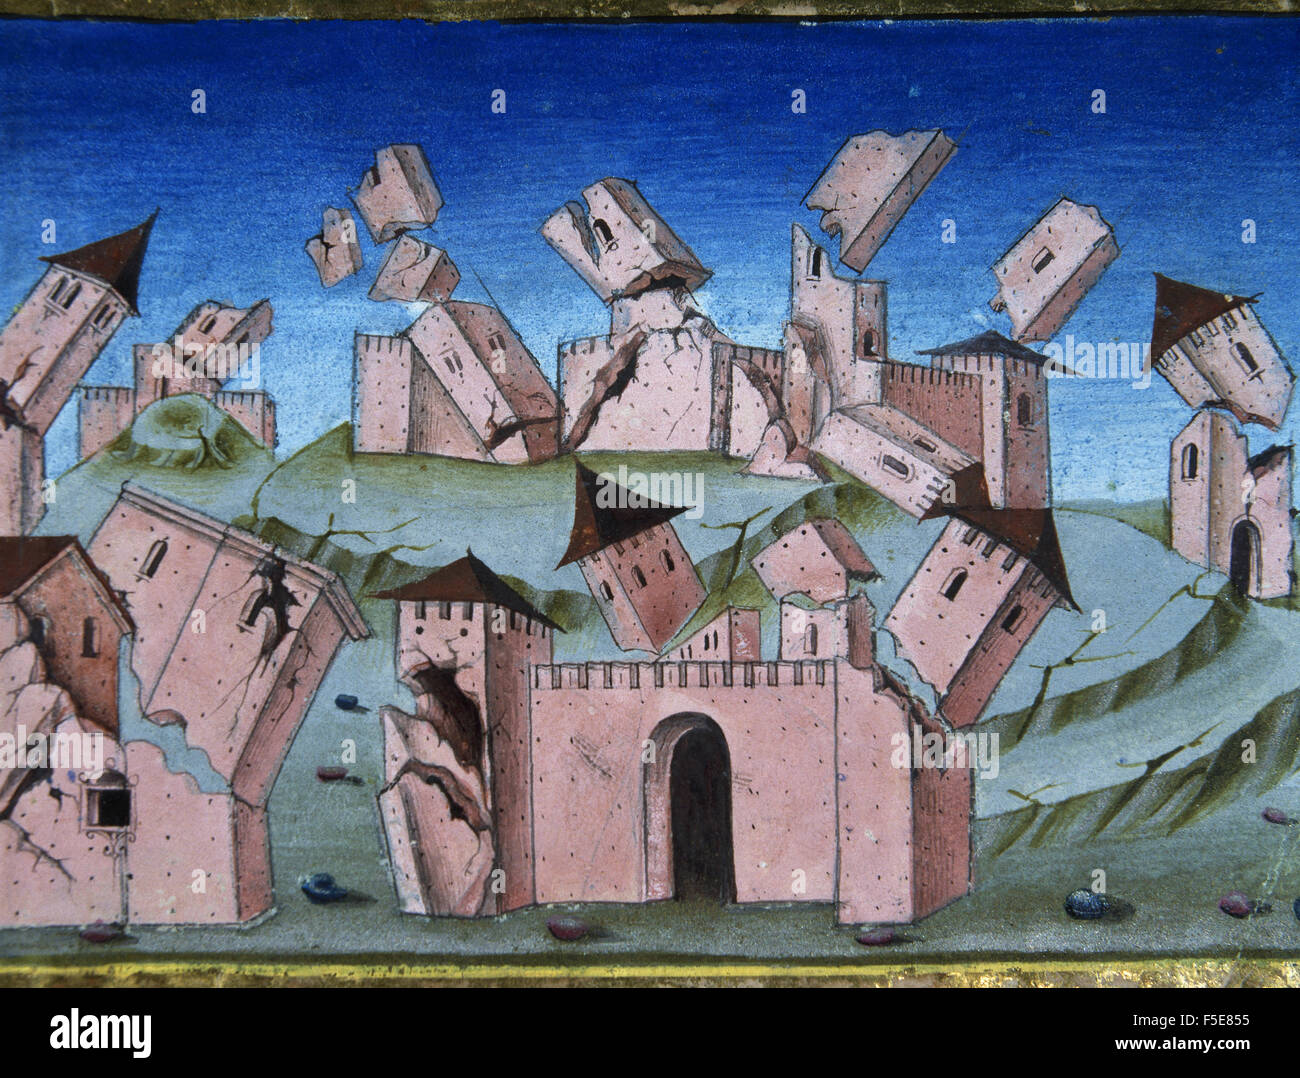 Cristoforo de Predis (1440-1486). Italian miniaturist. Miniature depicting The end of the world and the Last Judgment. All houses and villages be destroyed. 6th time. In Stories of Saint Joachim, Saint Anne, Virgin Mary, Jesus, the Baptist and the End of the World, 1476, written by Galeazzo Maria Sforza (1444-1476). Royal Library. Turin. Italy. Stock Photo